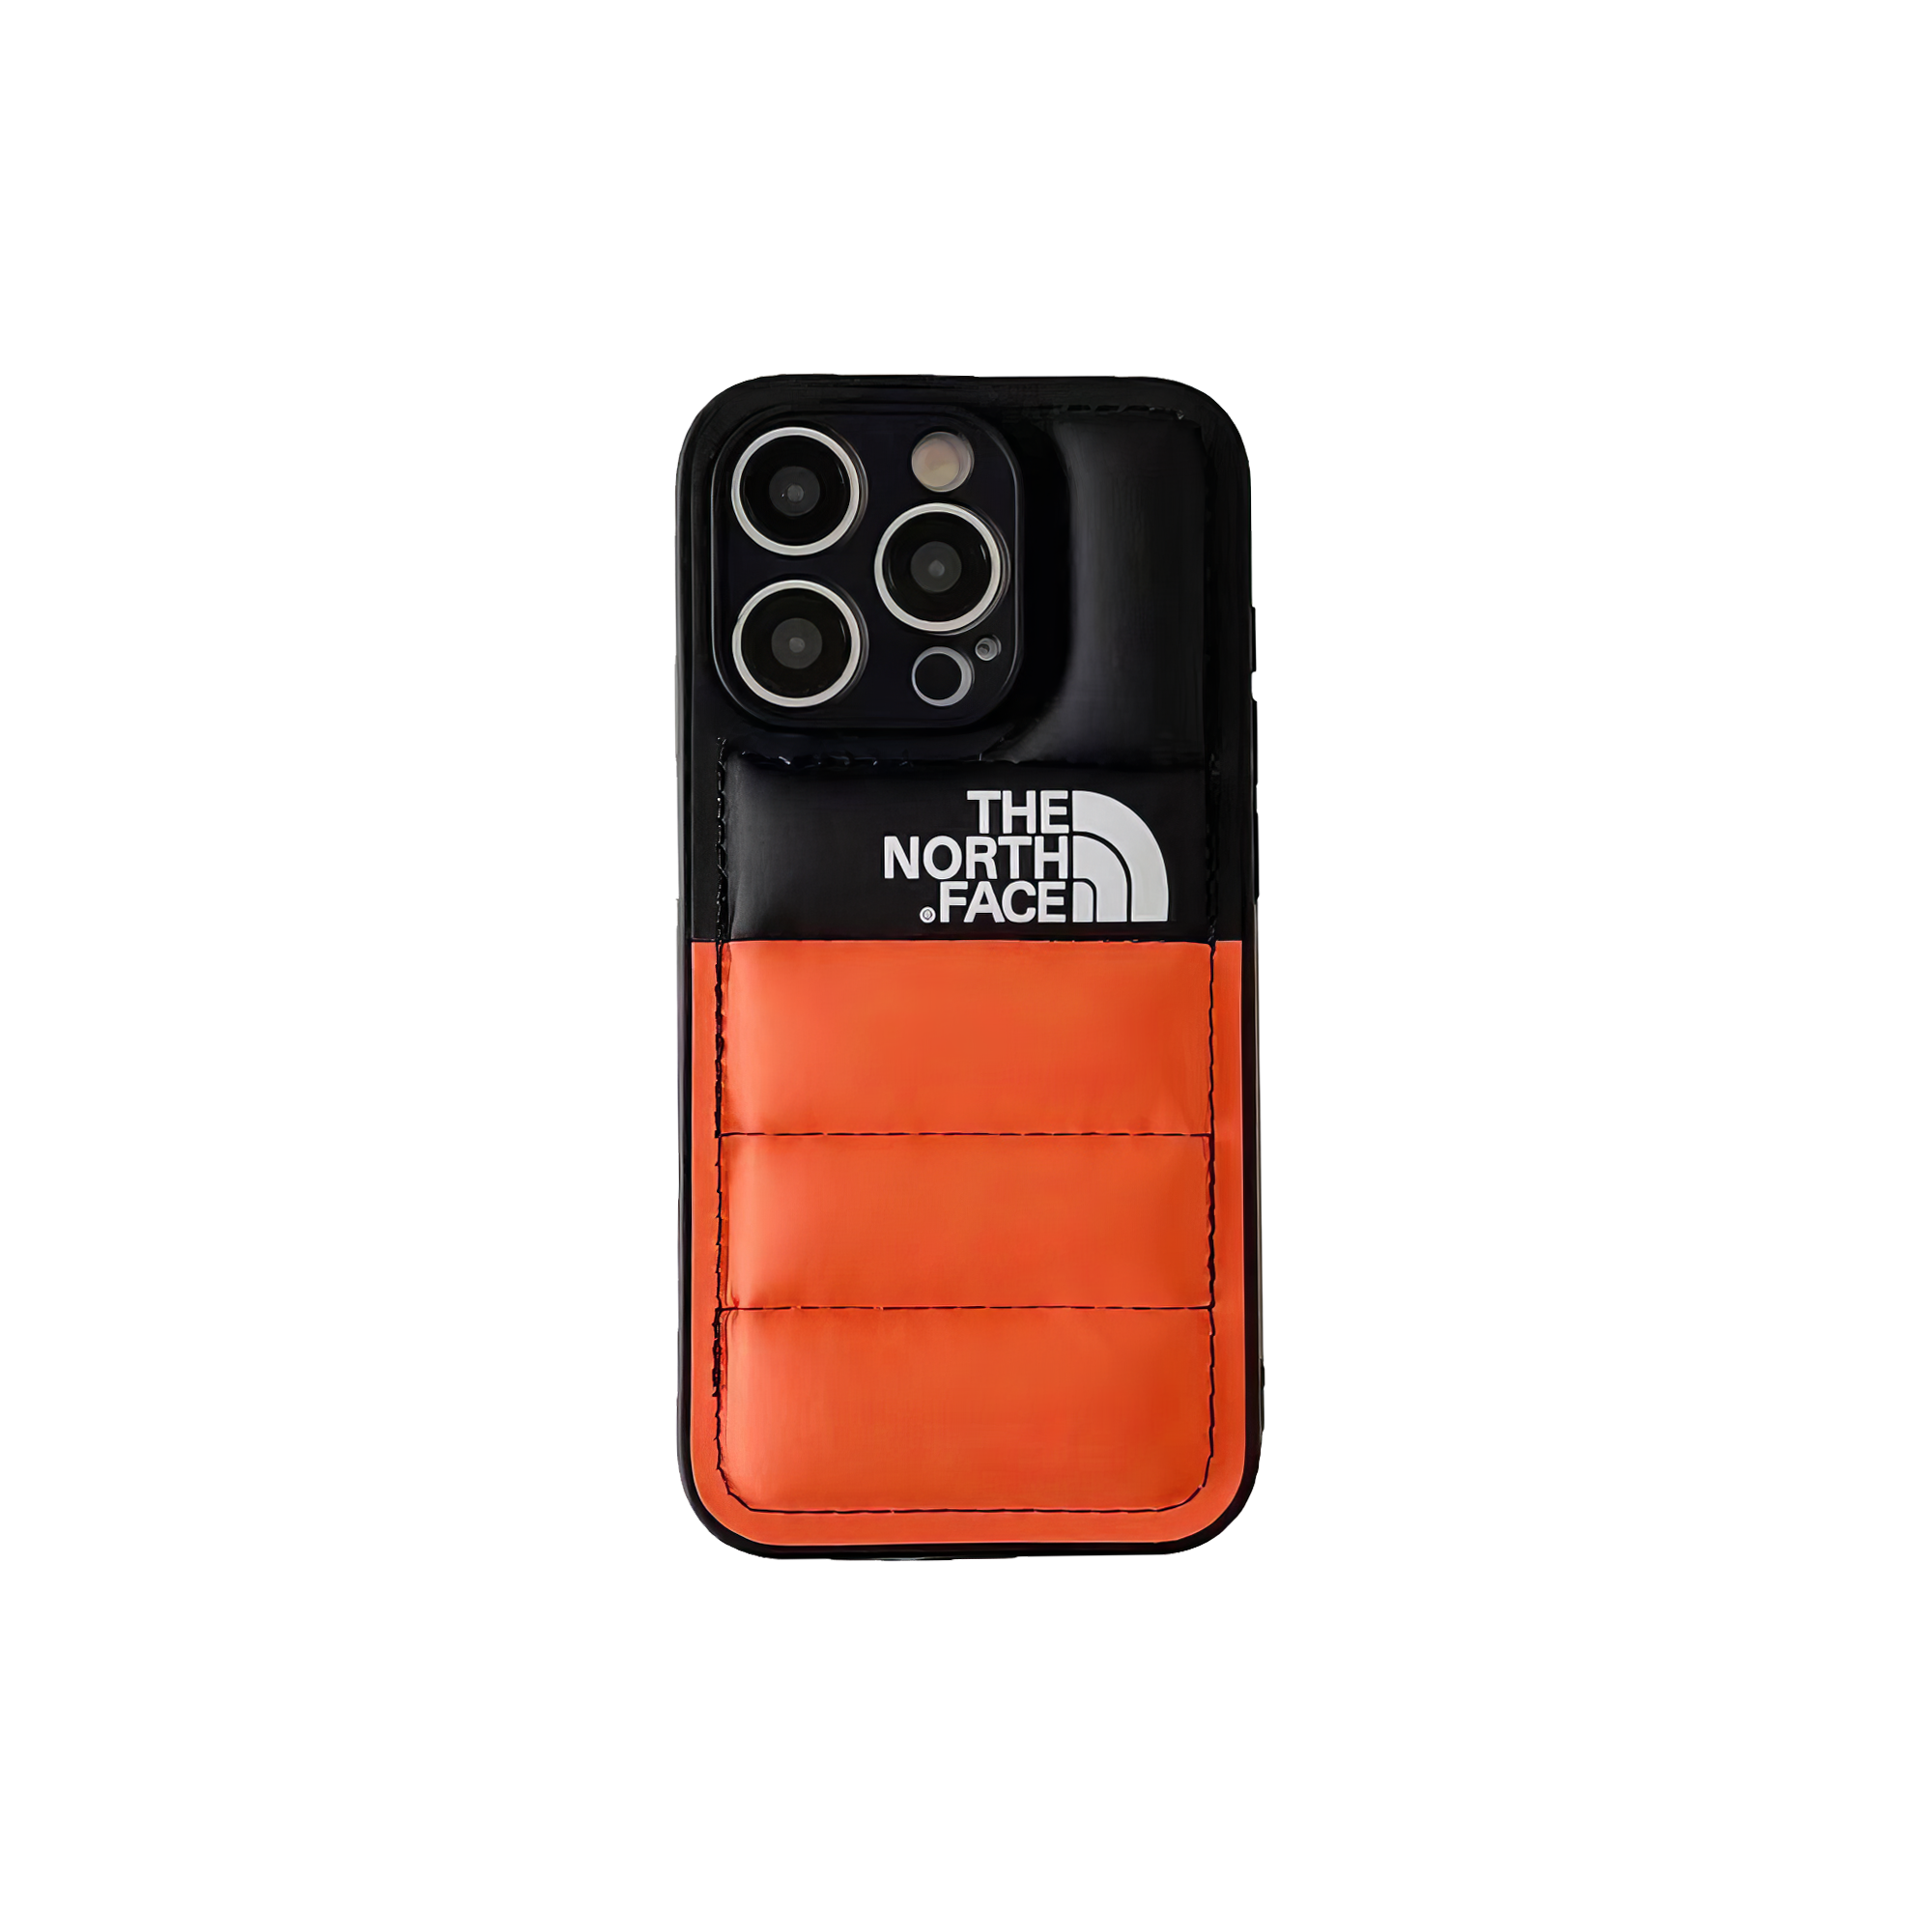 The North Face half orange and black smartphone case, merging vibrance with protection.